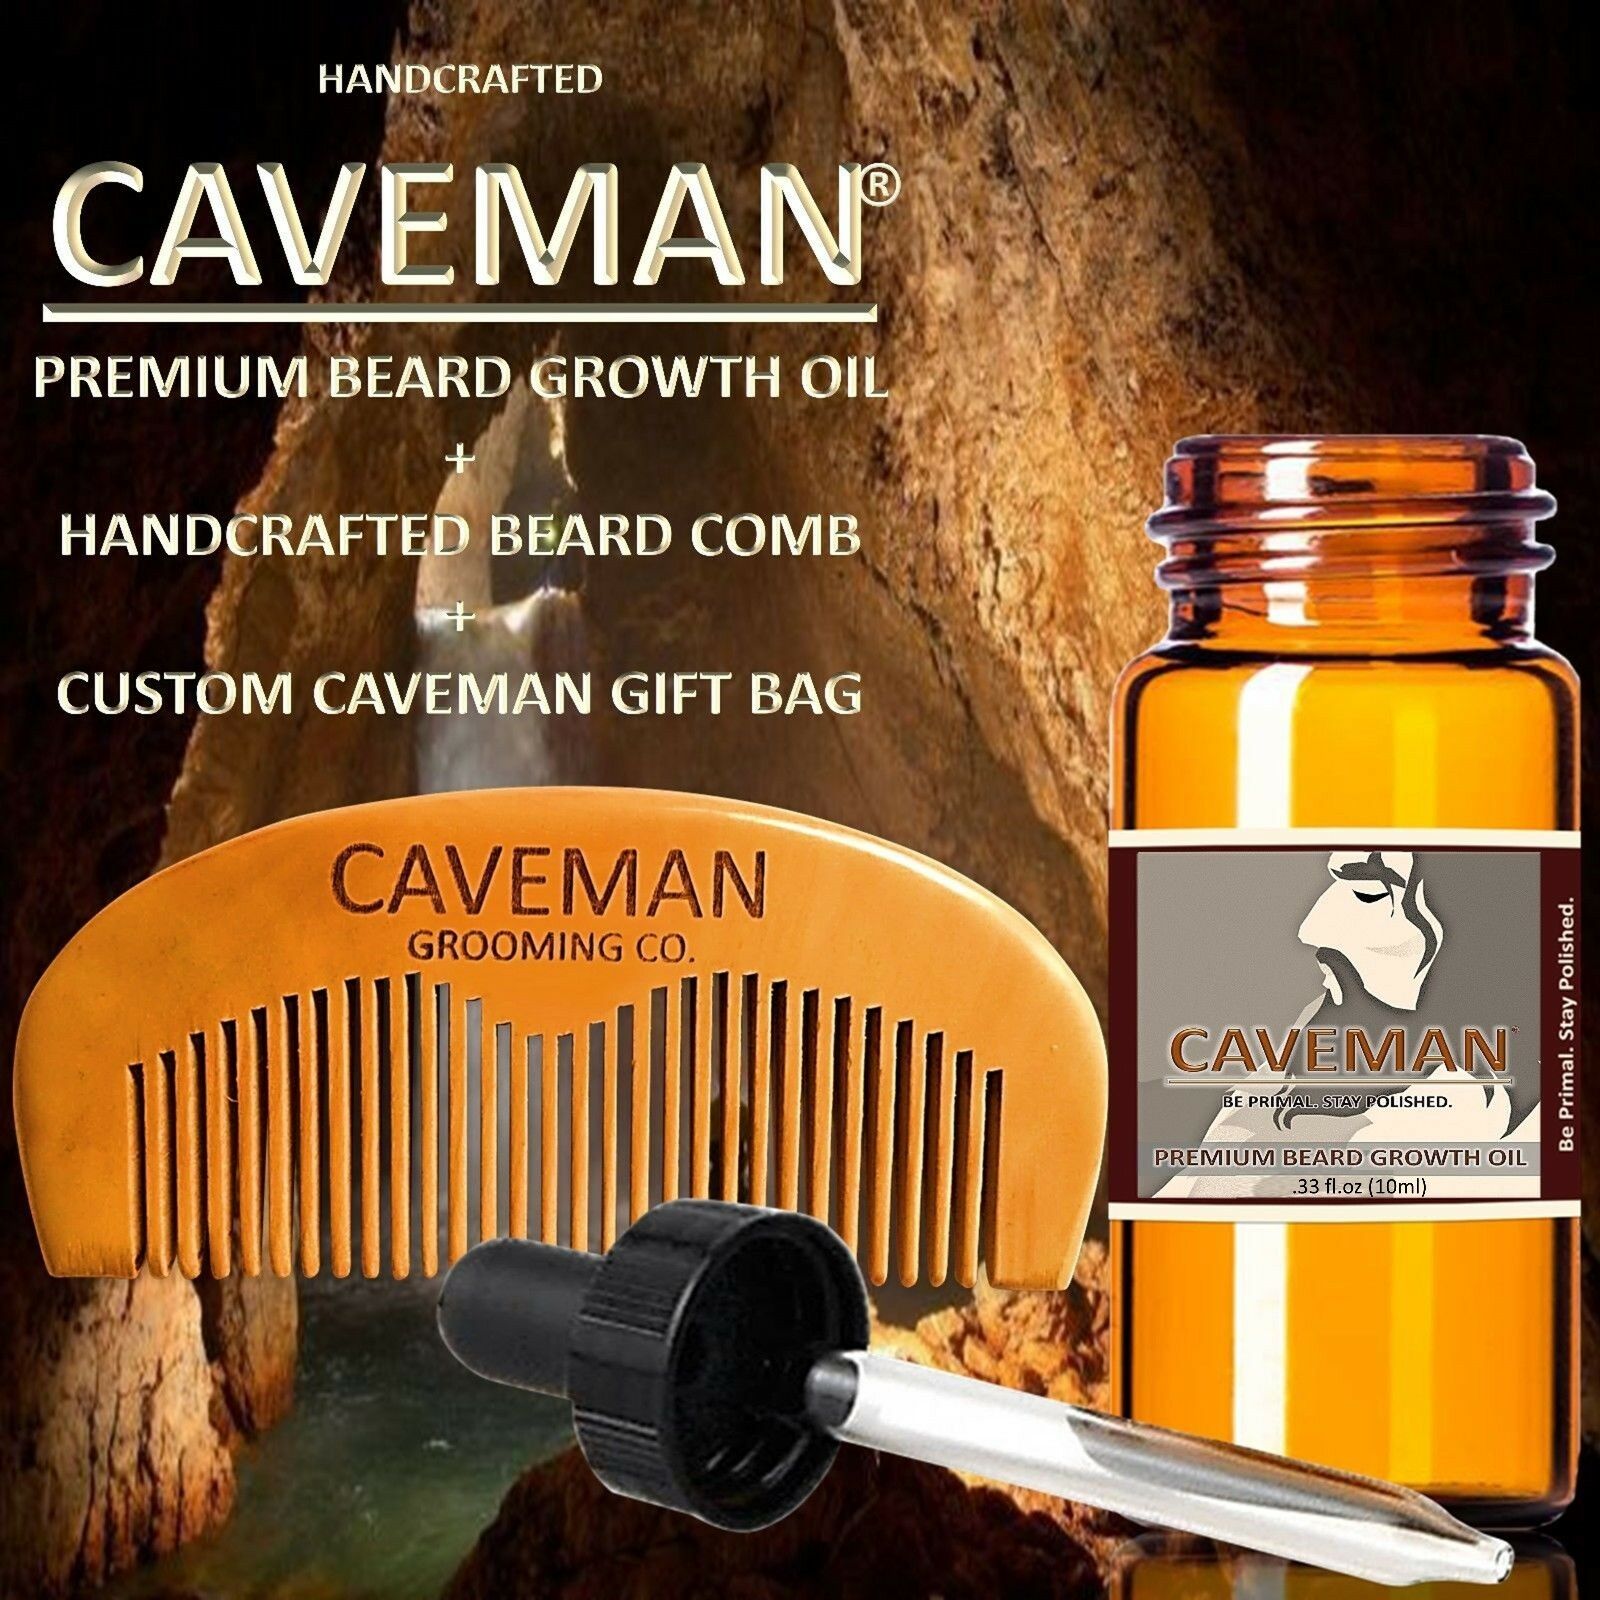 Handcrafted Caveman® Beard Growth Oil Plus Free Comb And Gift Bag